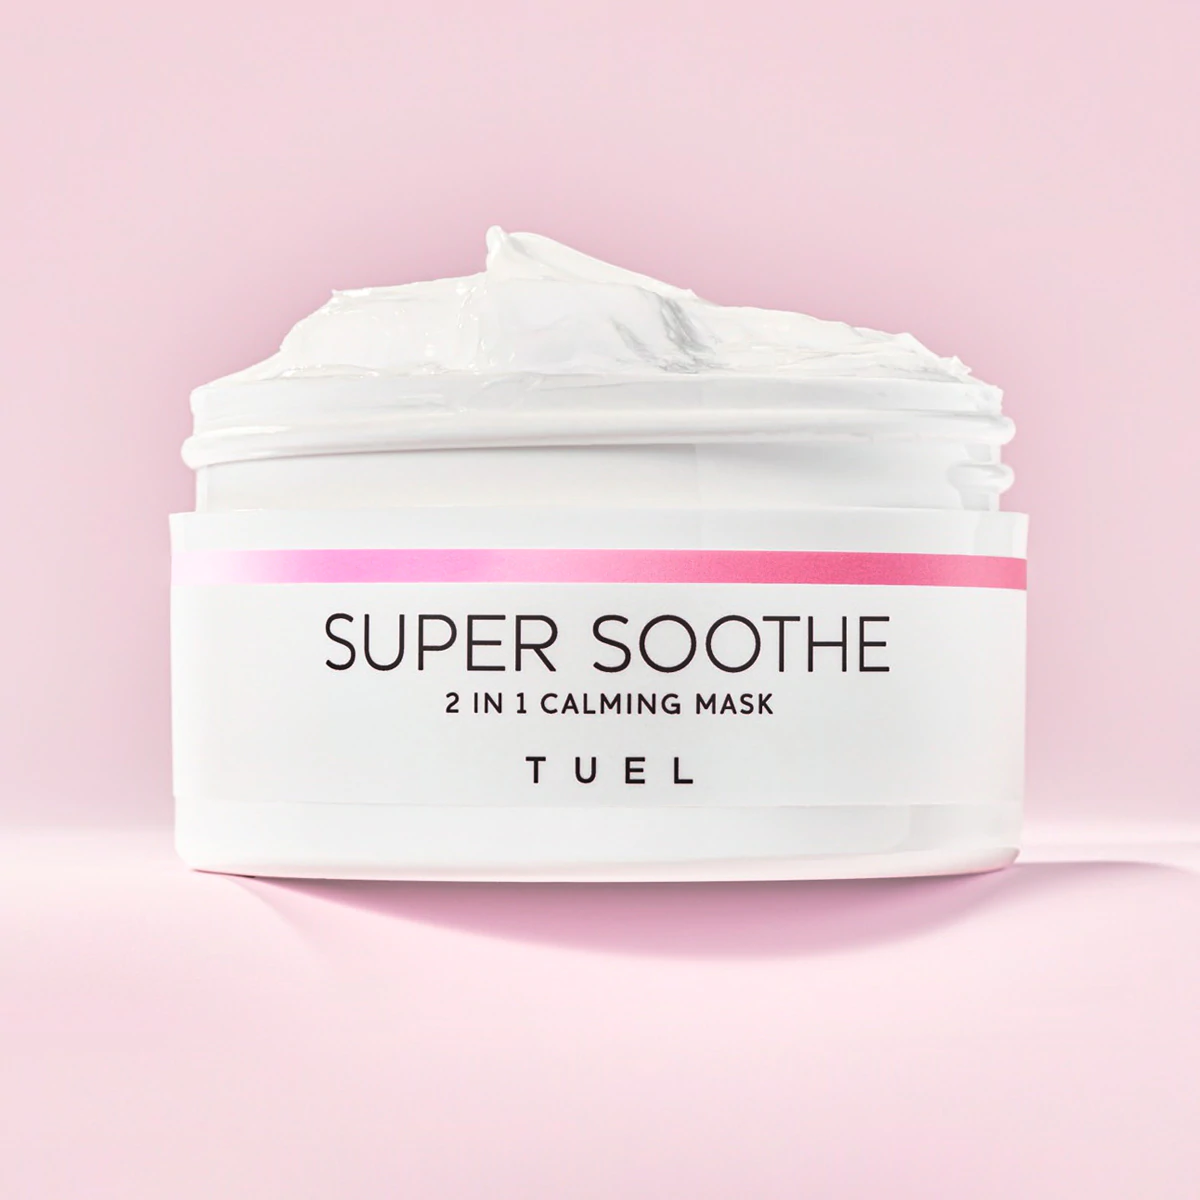 Super Soothe 2n1 Calming Mask - Pro Size